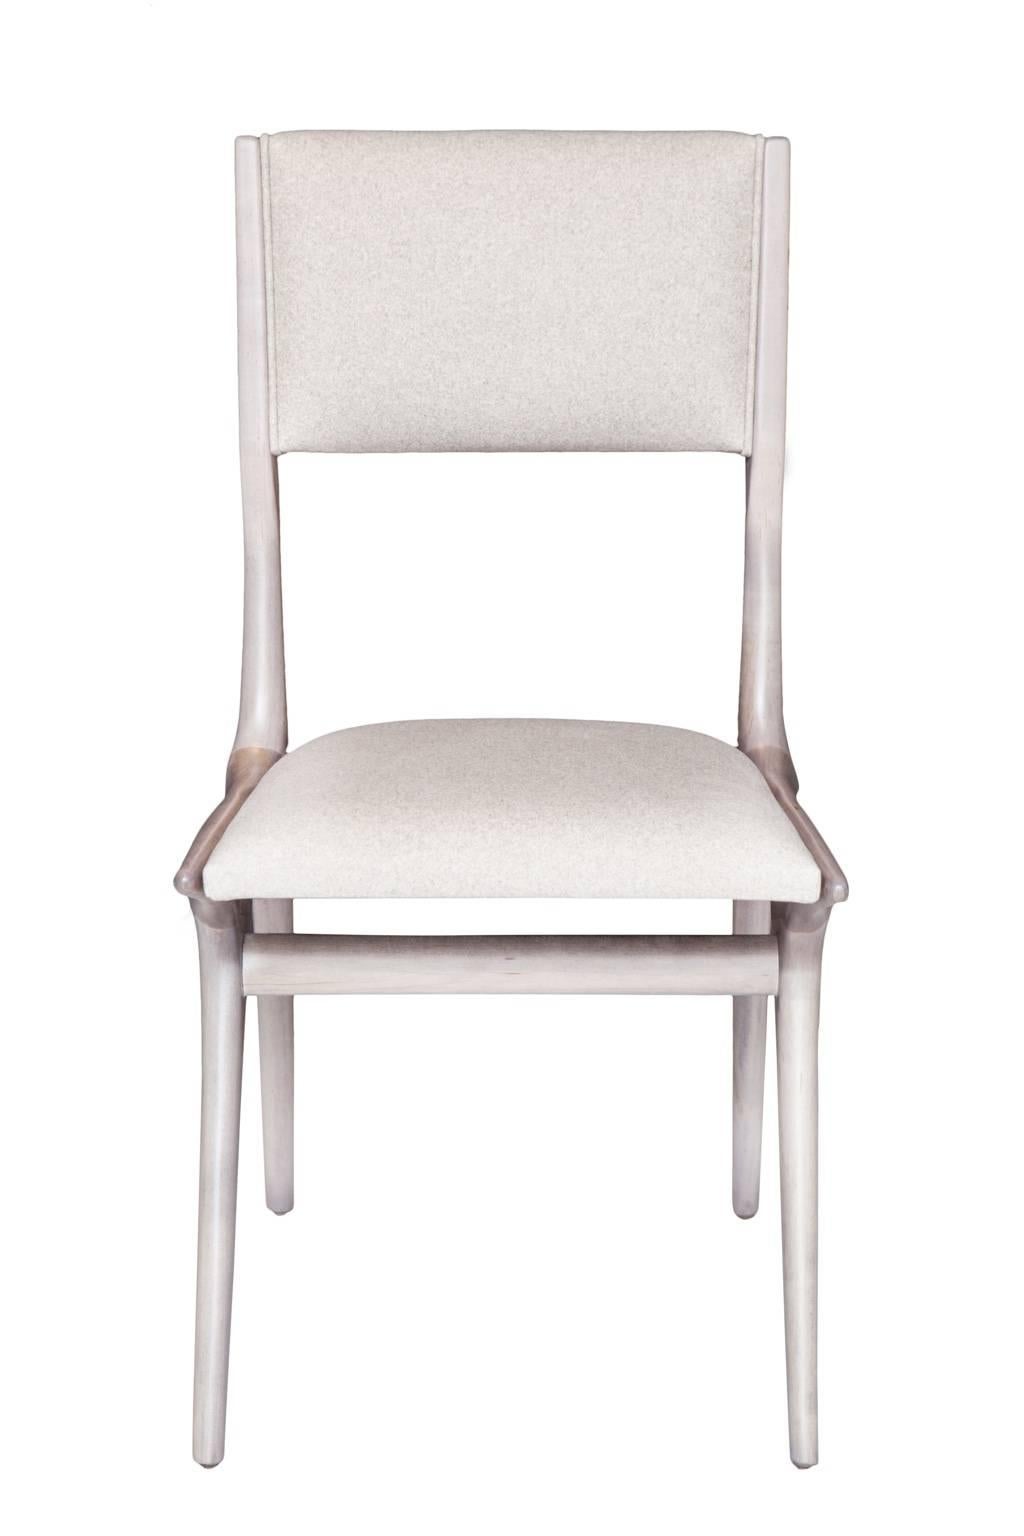 Set of ten Boone dining chairs.
Maple dining chair in grey bleached finish.
Seat height 18.5”. 
Seat depth 16”. 
COM requirements: 1.5 yards. 
5% up-charge for contrasting fabrics and or welting. 
COL Requirements:30 sq. feet. 
5% percentage